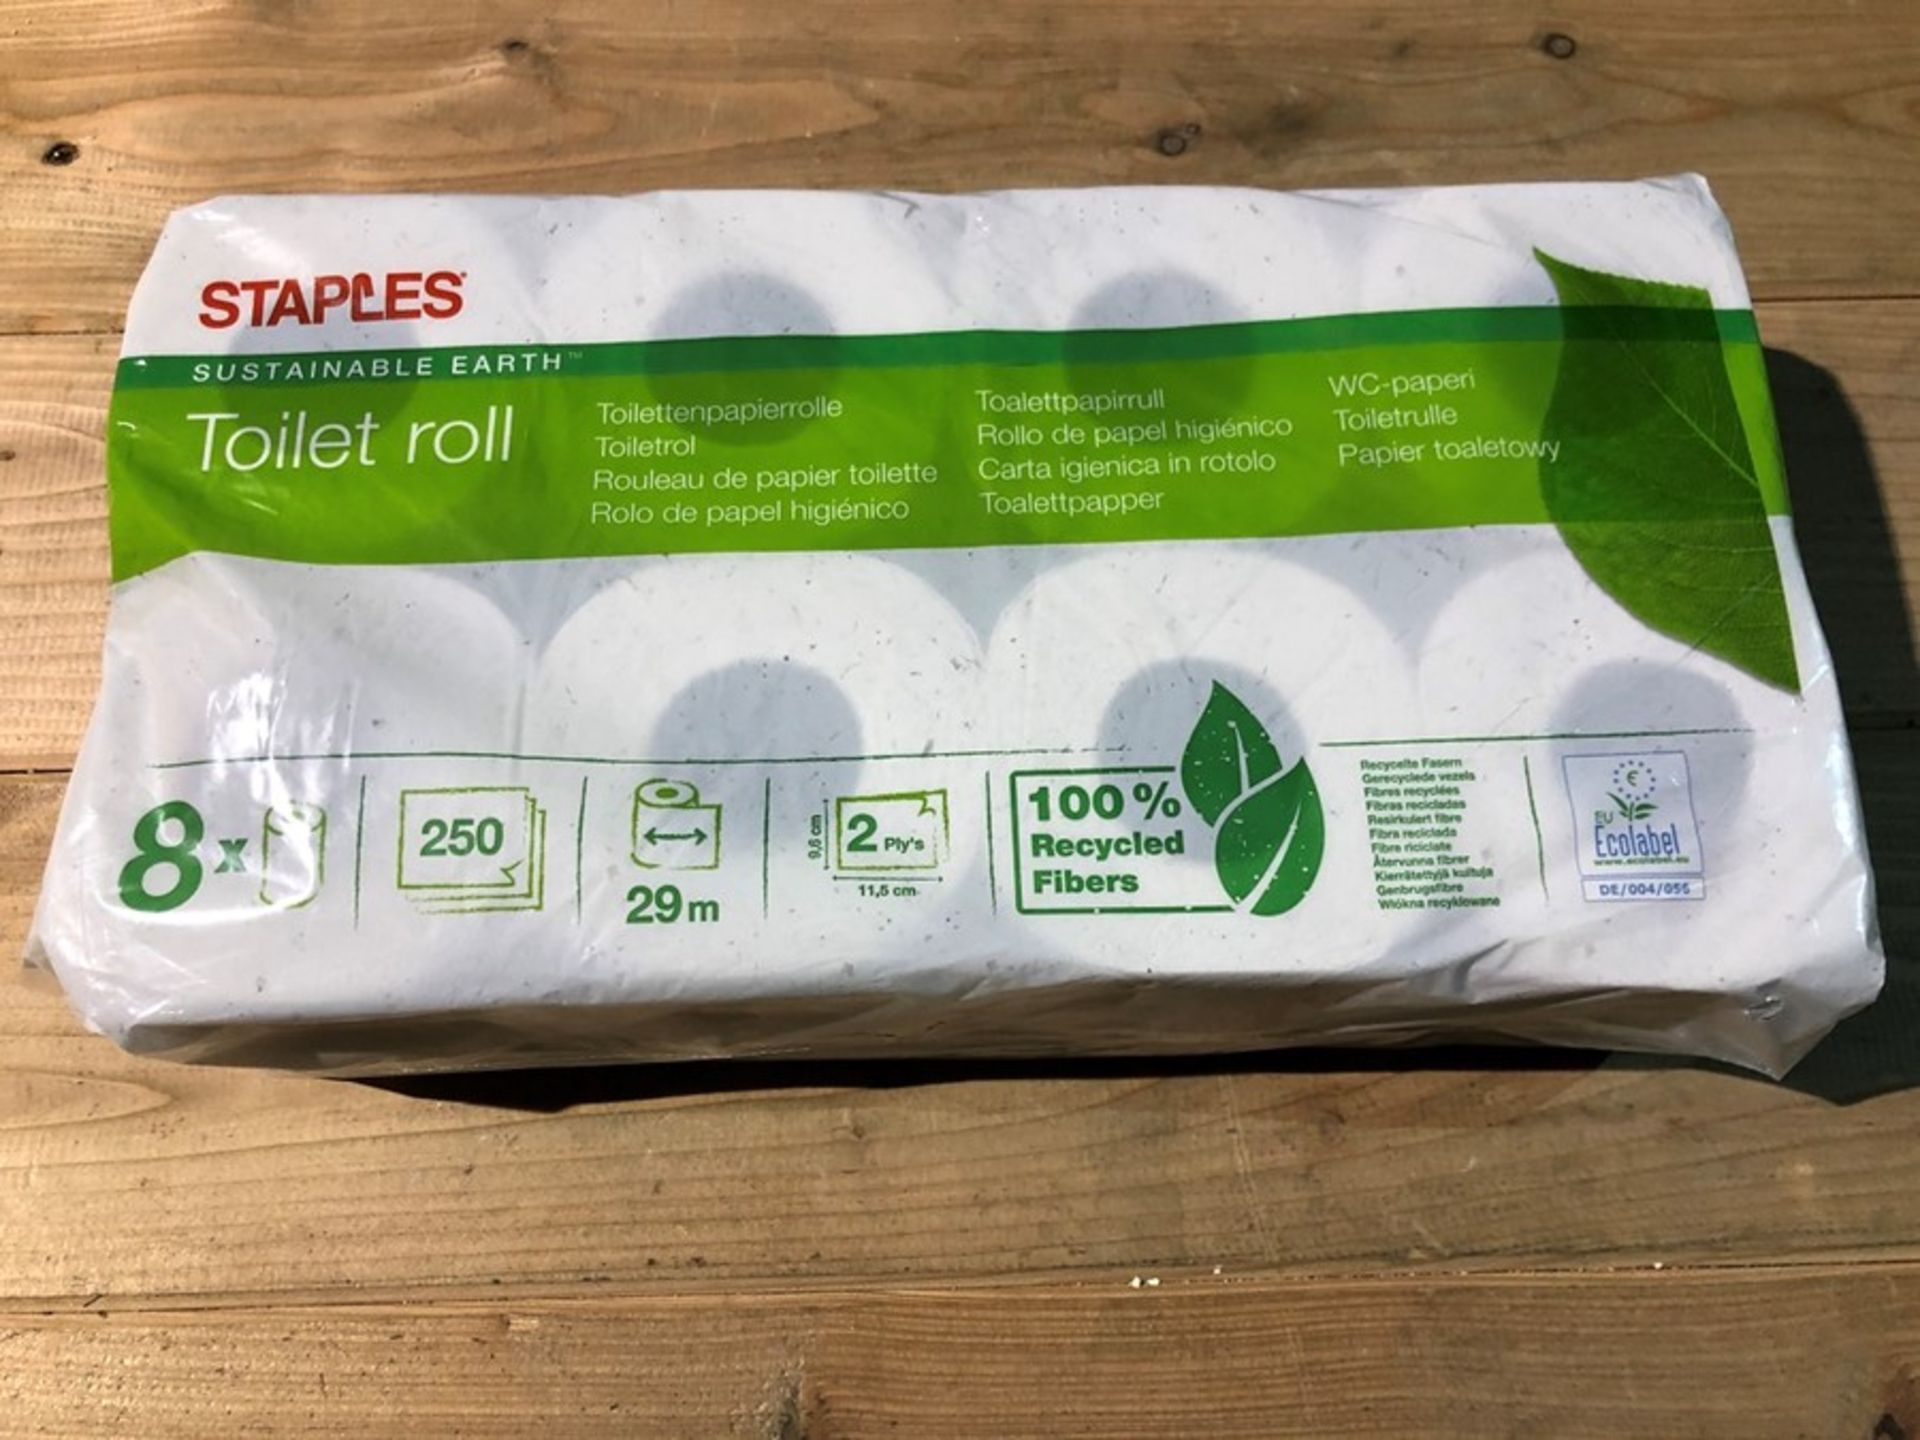 1 PACK OF 8 SUSTAINABLE EARTH TOILET ROLL (PUBLIC VIEWING AVAILABLE)